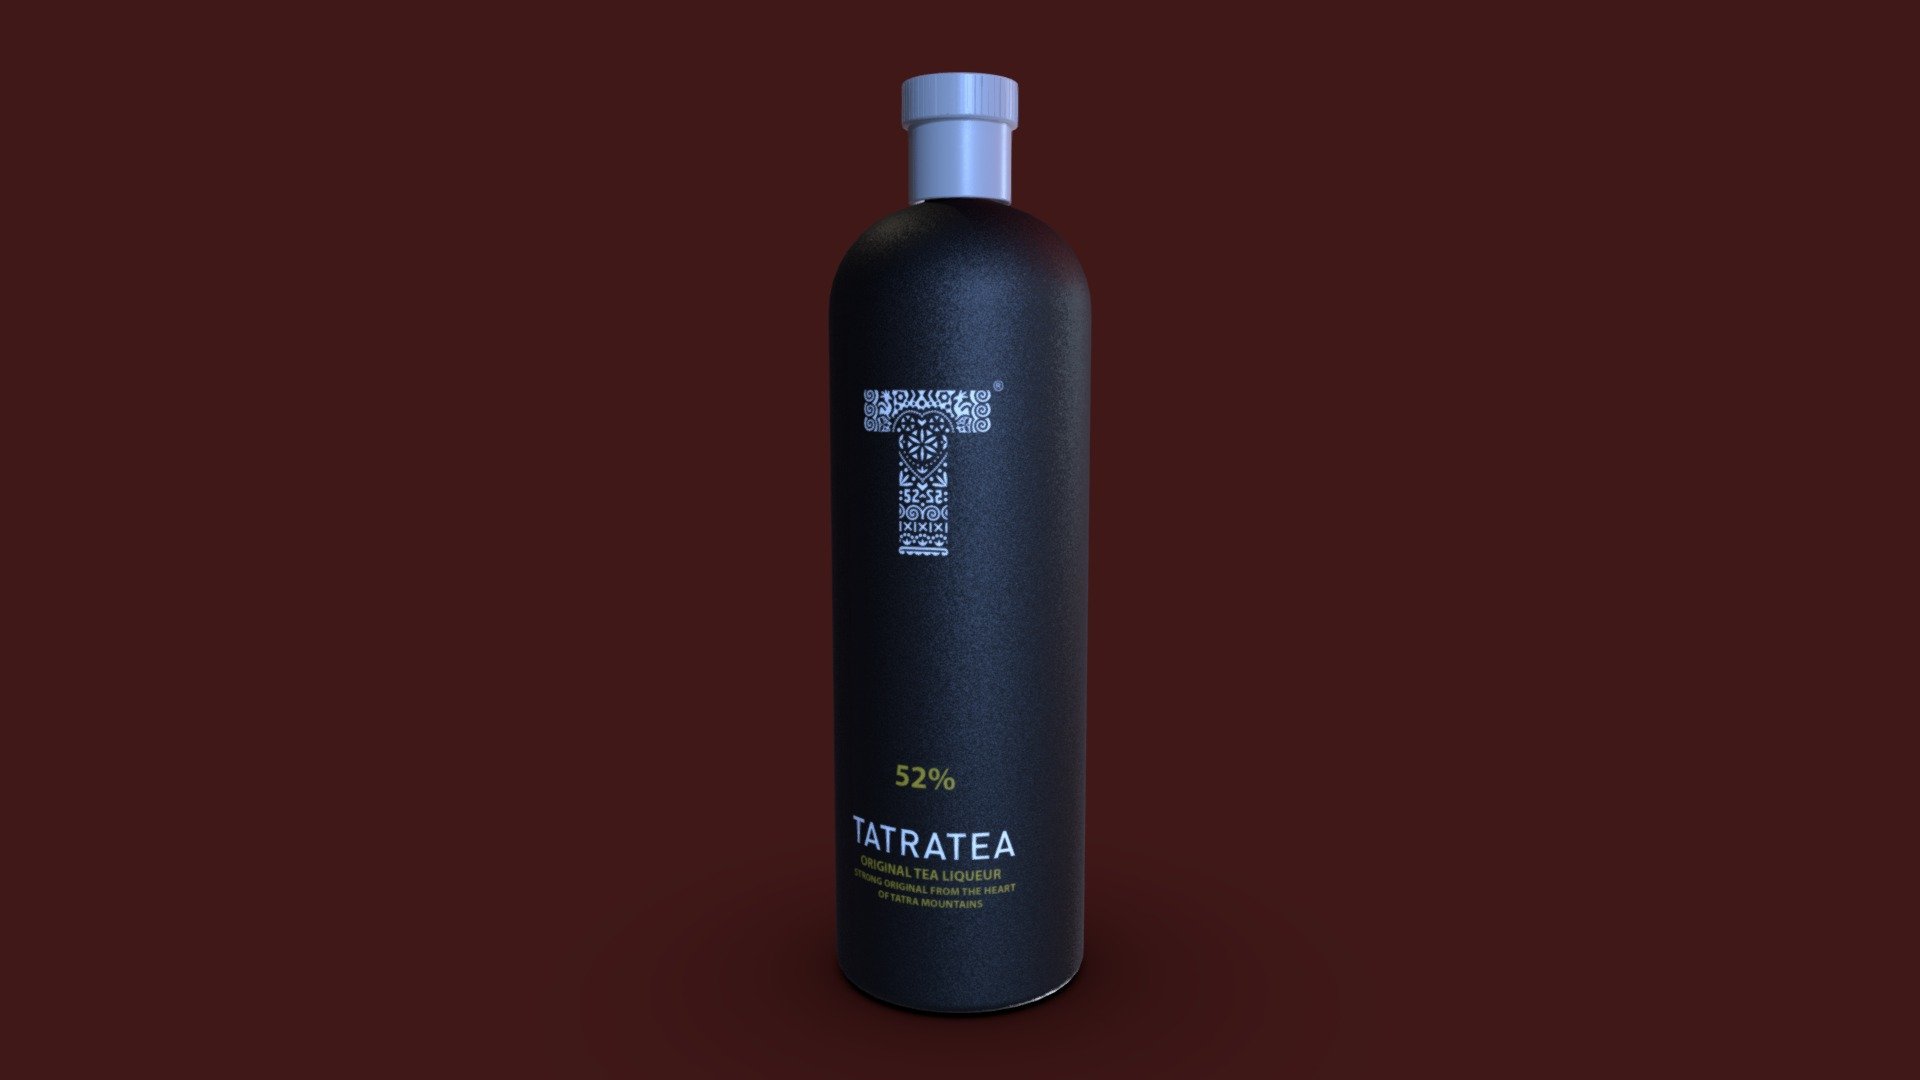 A model of an original product created in a small country with a big heart in the middle of Europe.
https://www.tatratea.com/sk/ - TATRATEA 52% - 3D model by slavik_dsgn 3d model